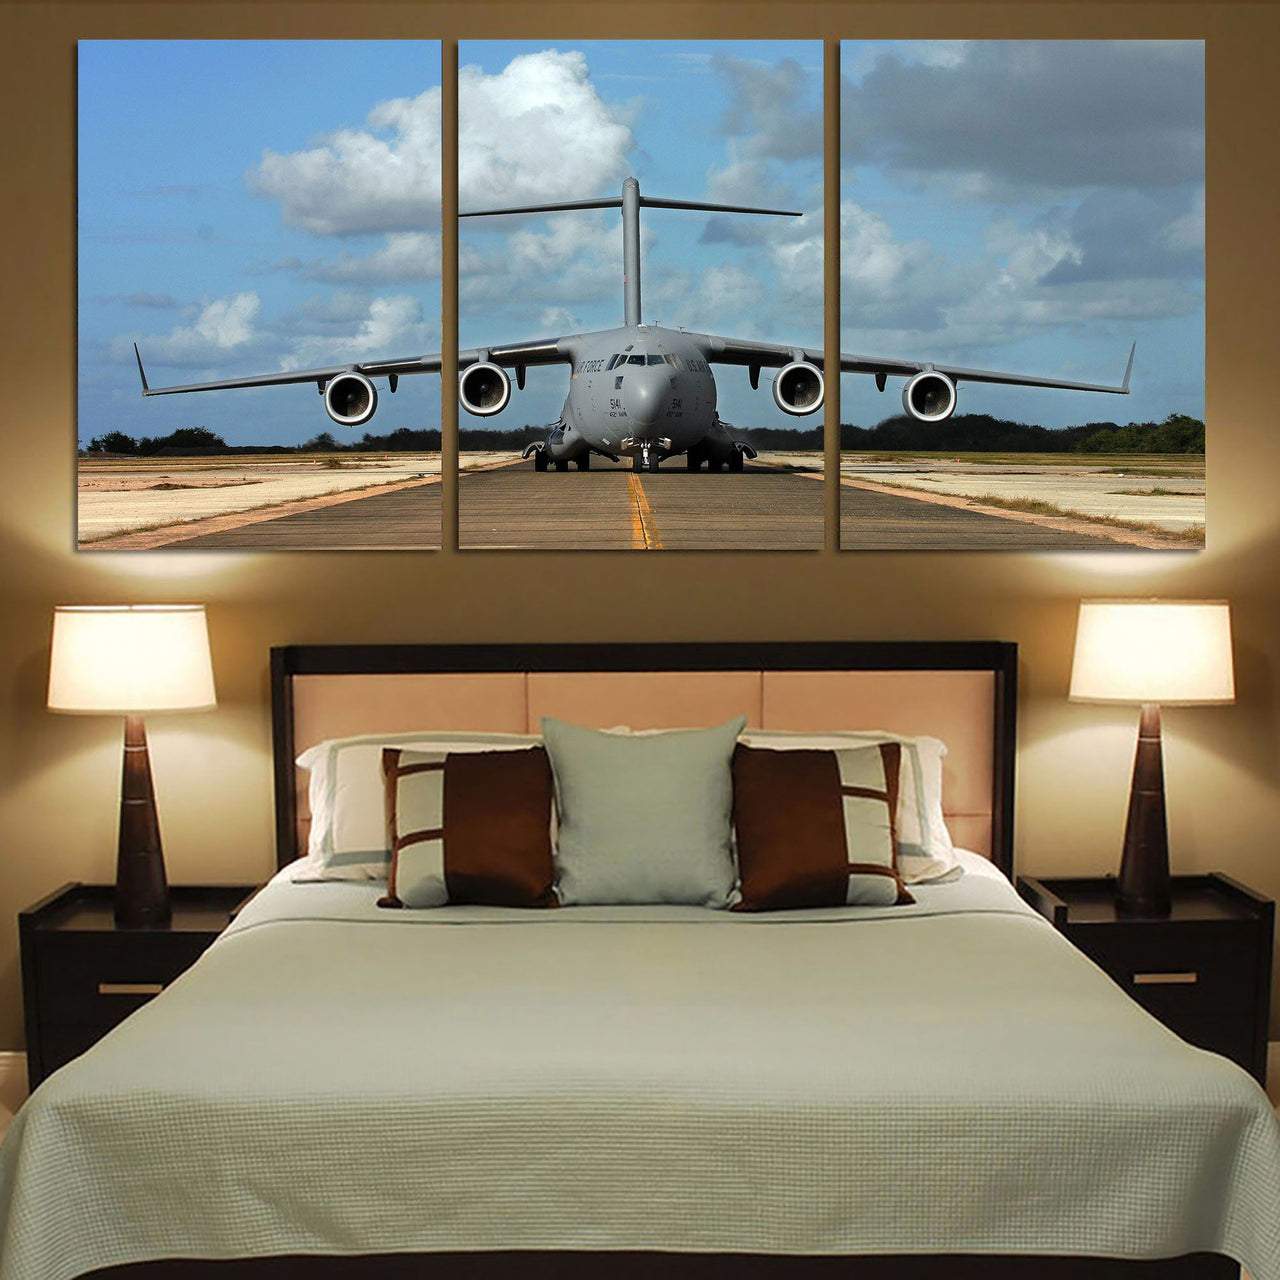 Face to Face with Military Cargo Airplane Printed Canvas Posters (3 Pieces) Aviation Shop 